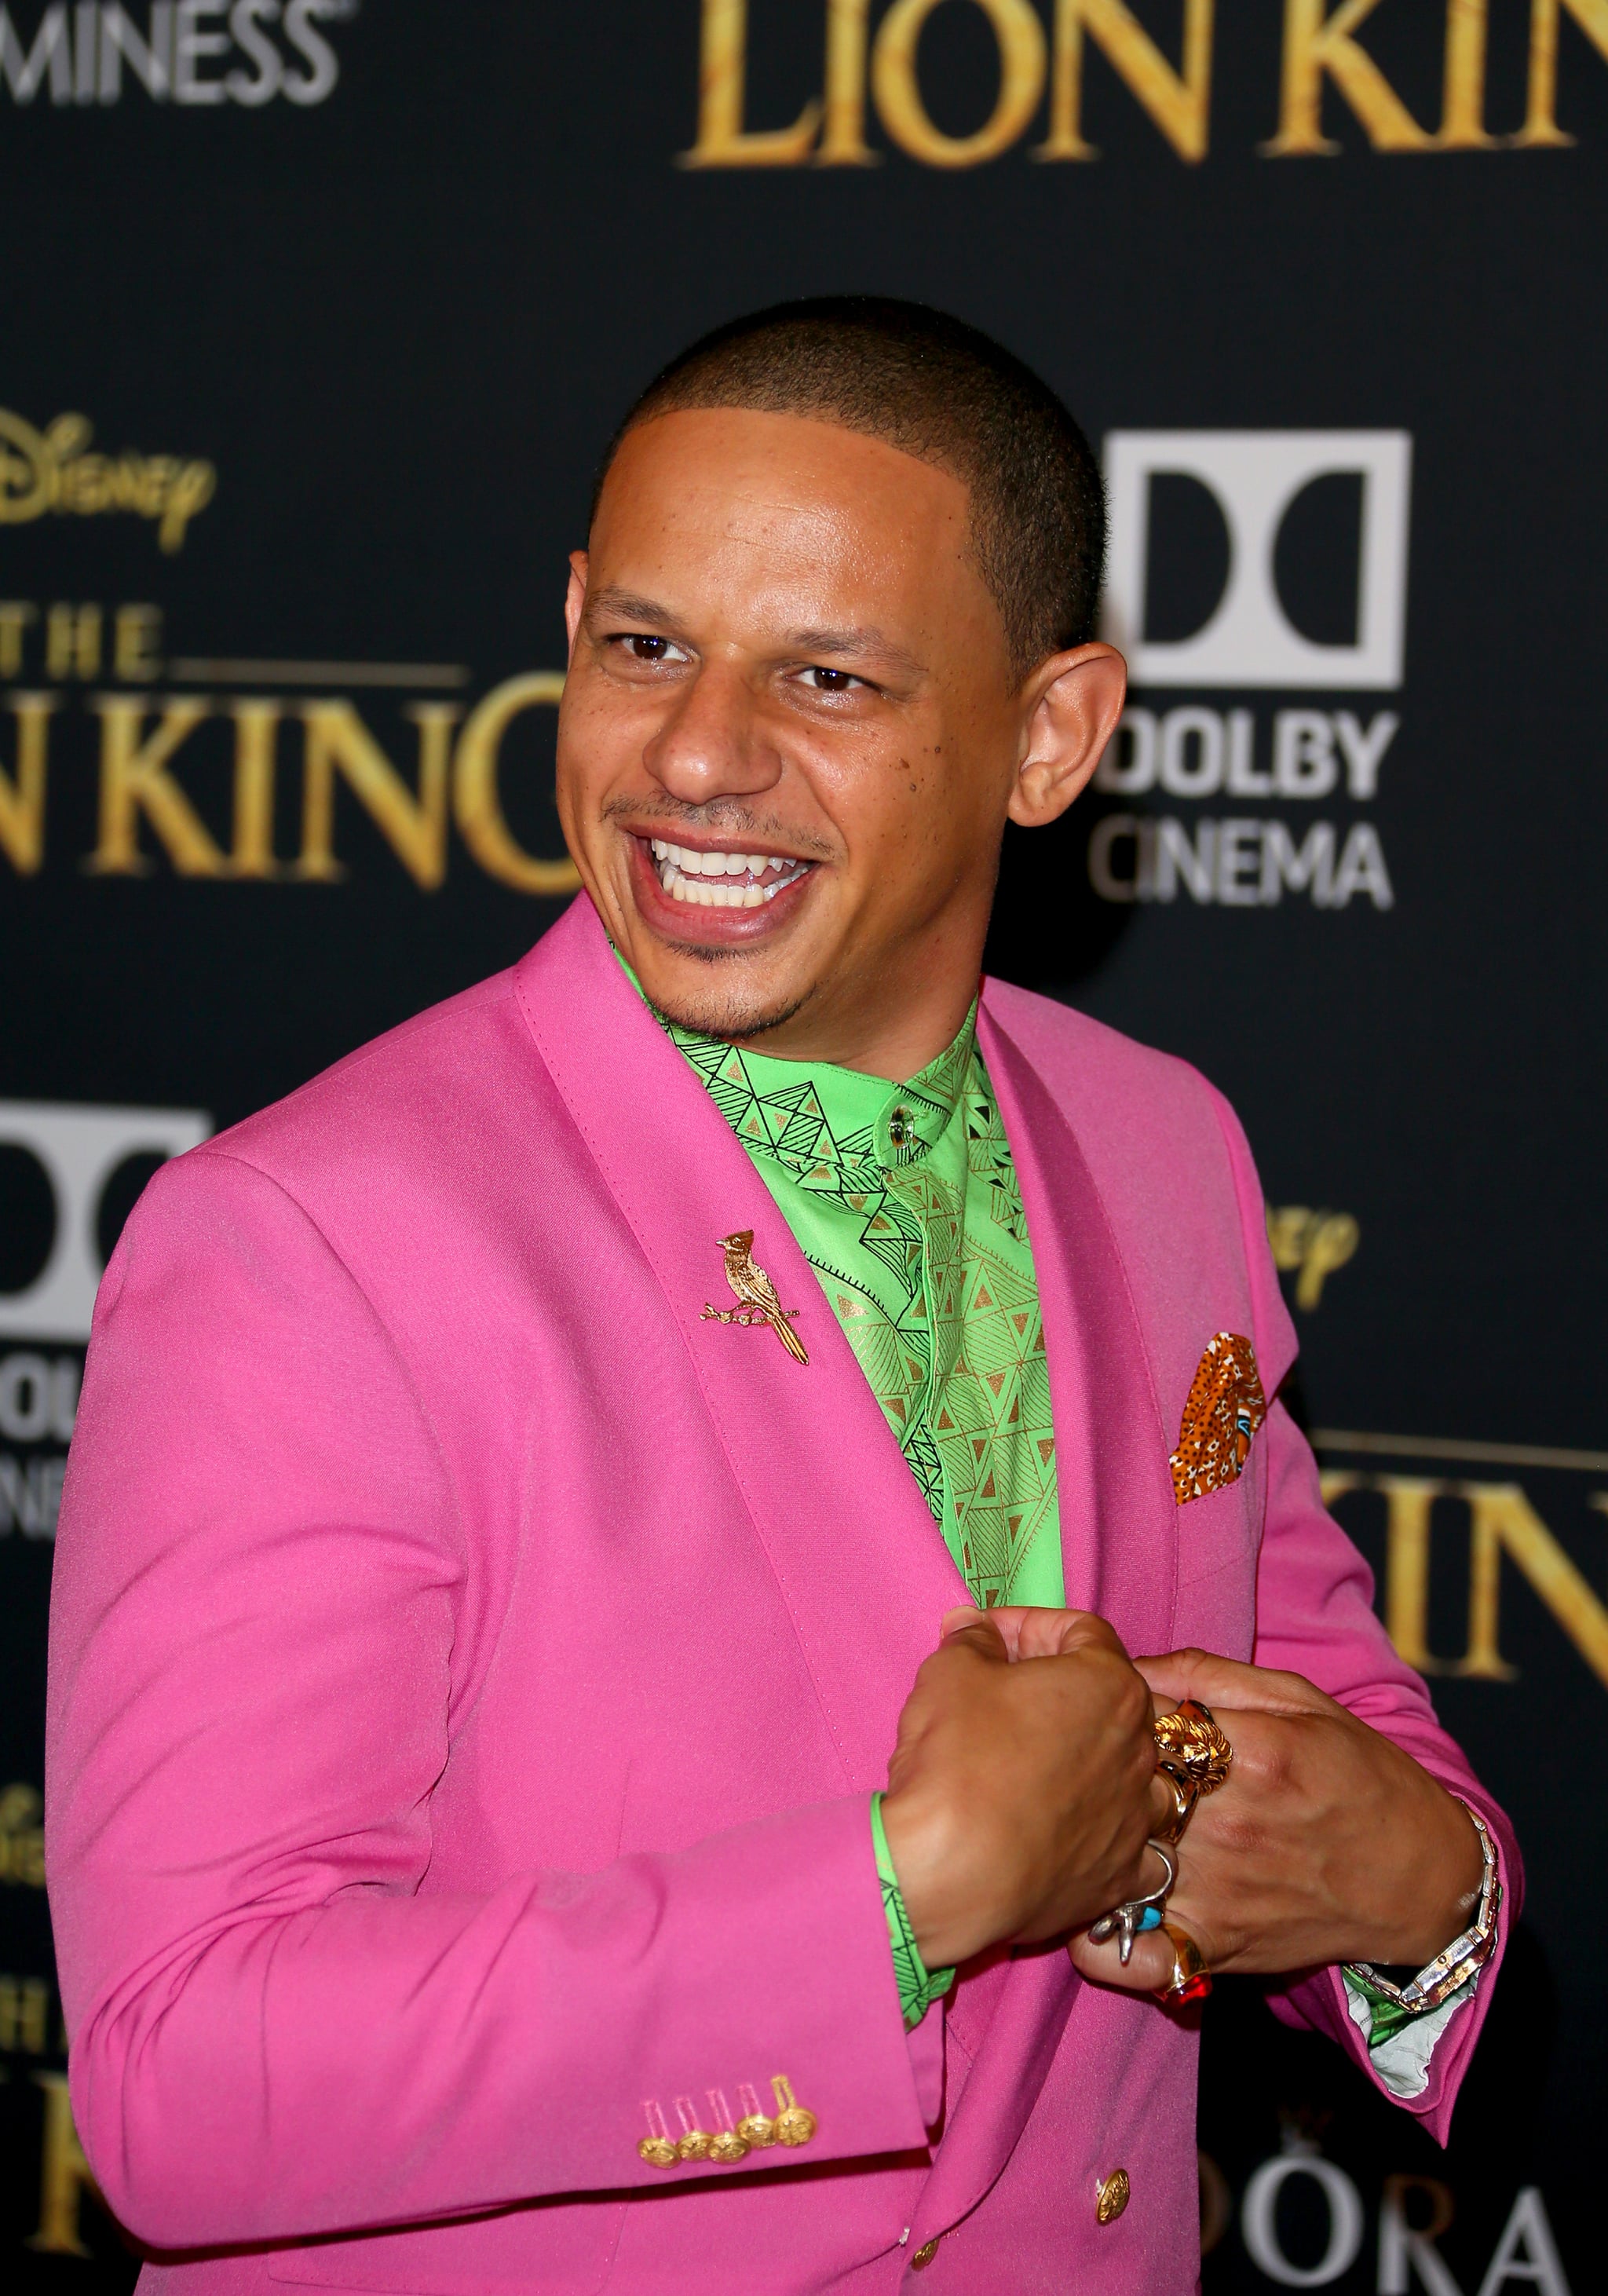 Eric Andre at The Lion King premiere in 